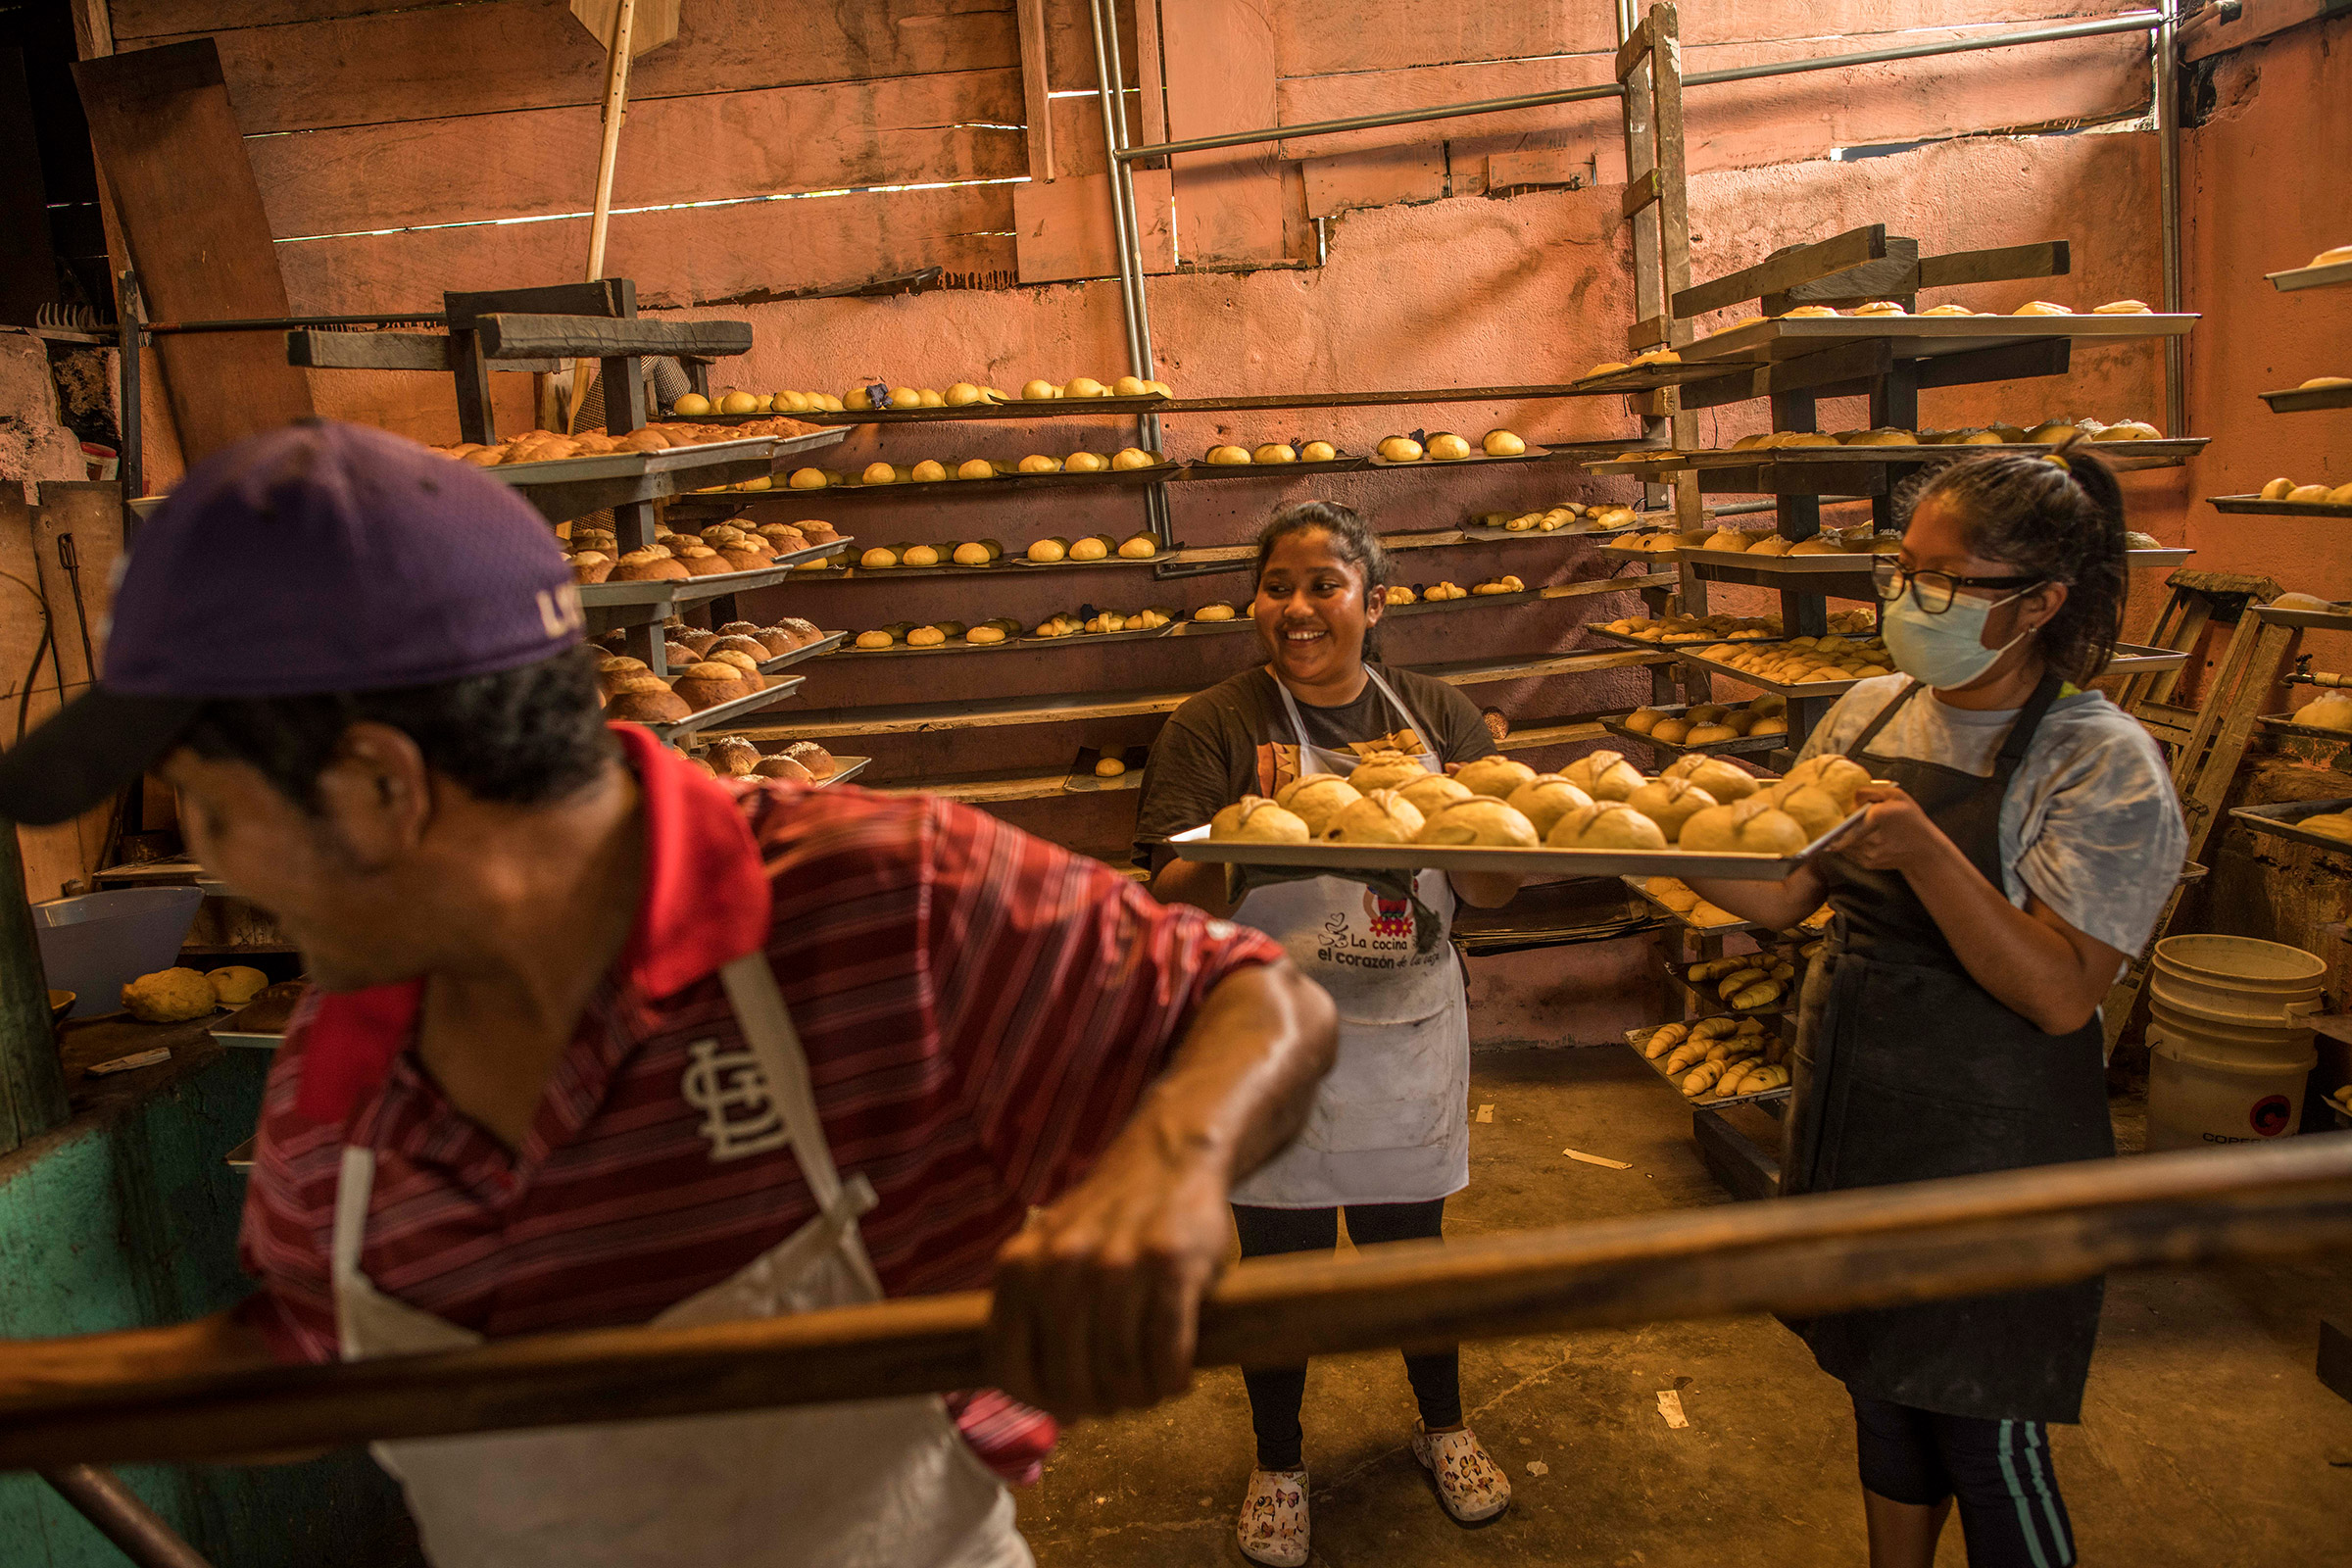 Bakery of Amelia Ixcoy, 56 (not pictured), who is Letty Baran's step sister, founder of the cooperative. This business was supported economically by the cooperative.El Palmar, Quetzaltenango, Guatemala. April 9, 2022.Around 35 residents of El Palmar, who have relative in the US, establish a cooperative in order to help their family with loans and training to start and support local business. The co-op holds around 500,000 quetzales—around $65,000—and has so far invested in ten of its members’ new businesses, including a baker, mobile phones repair shop, a restaurant.